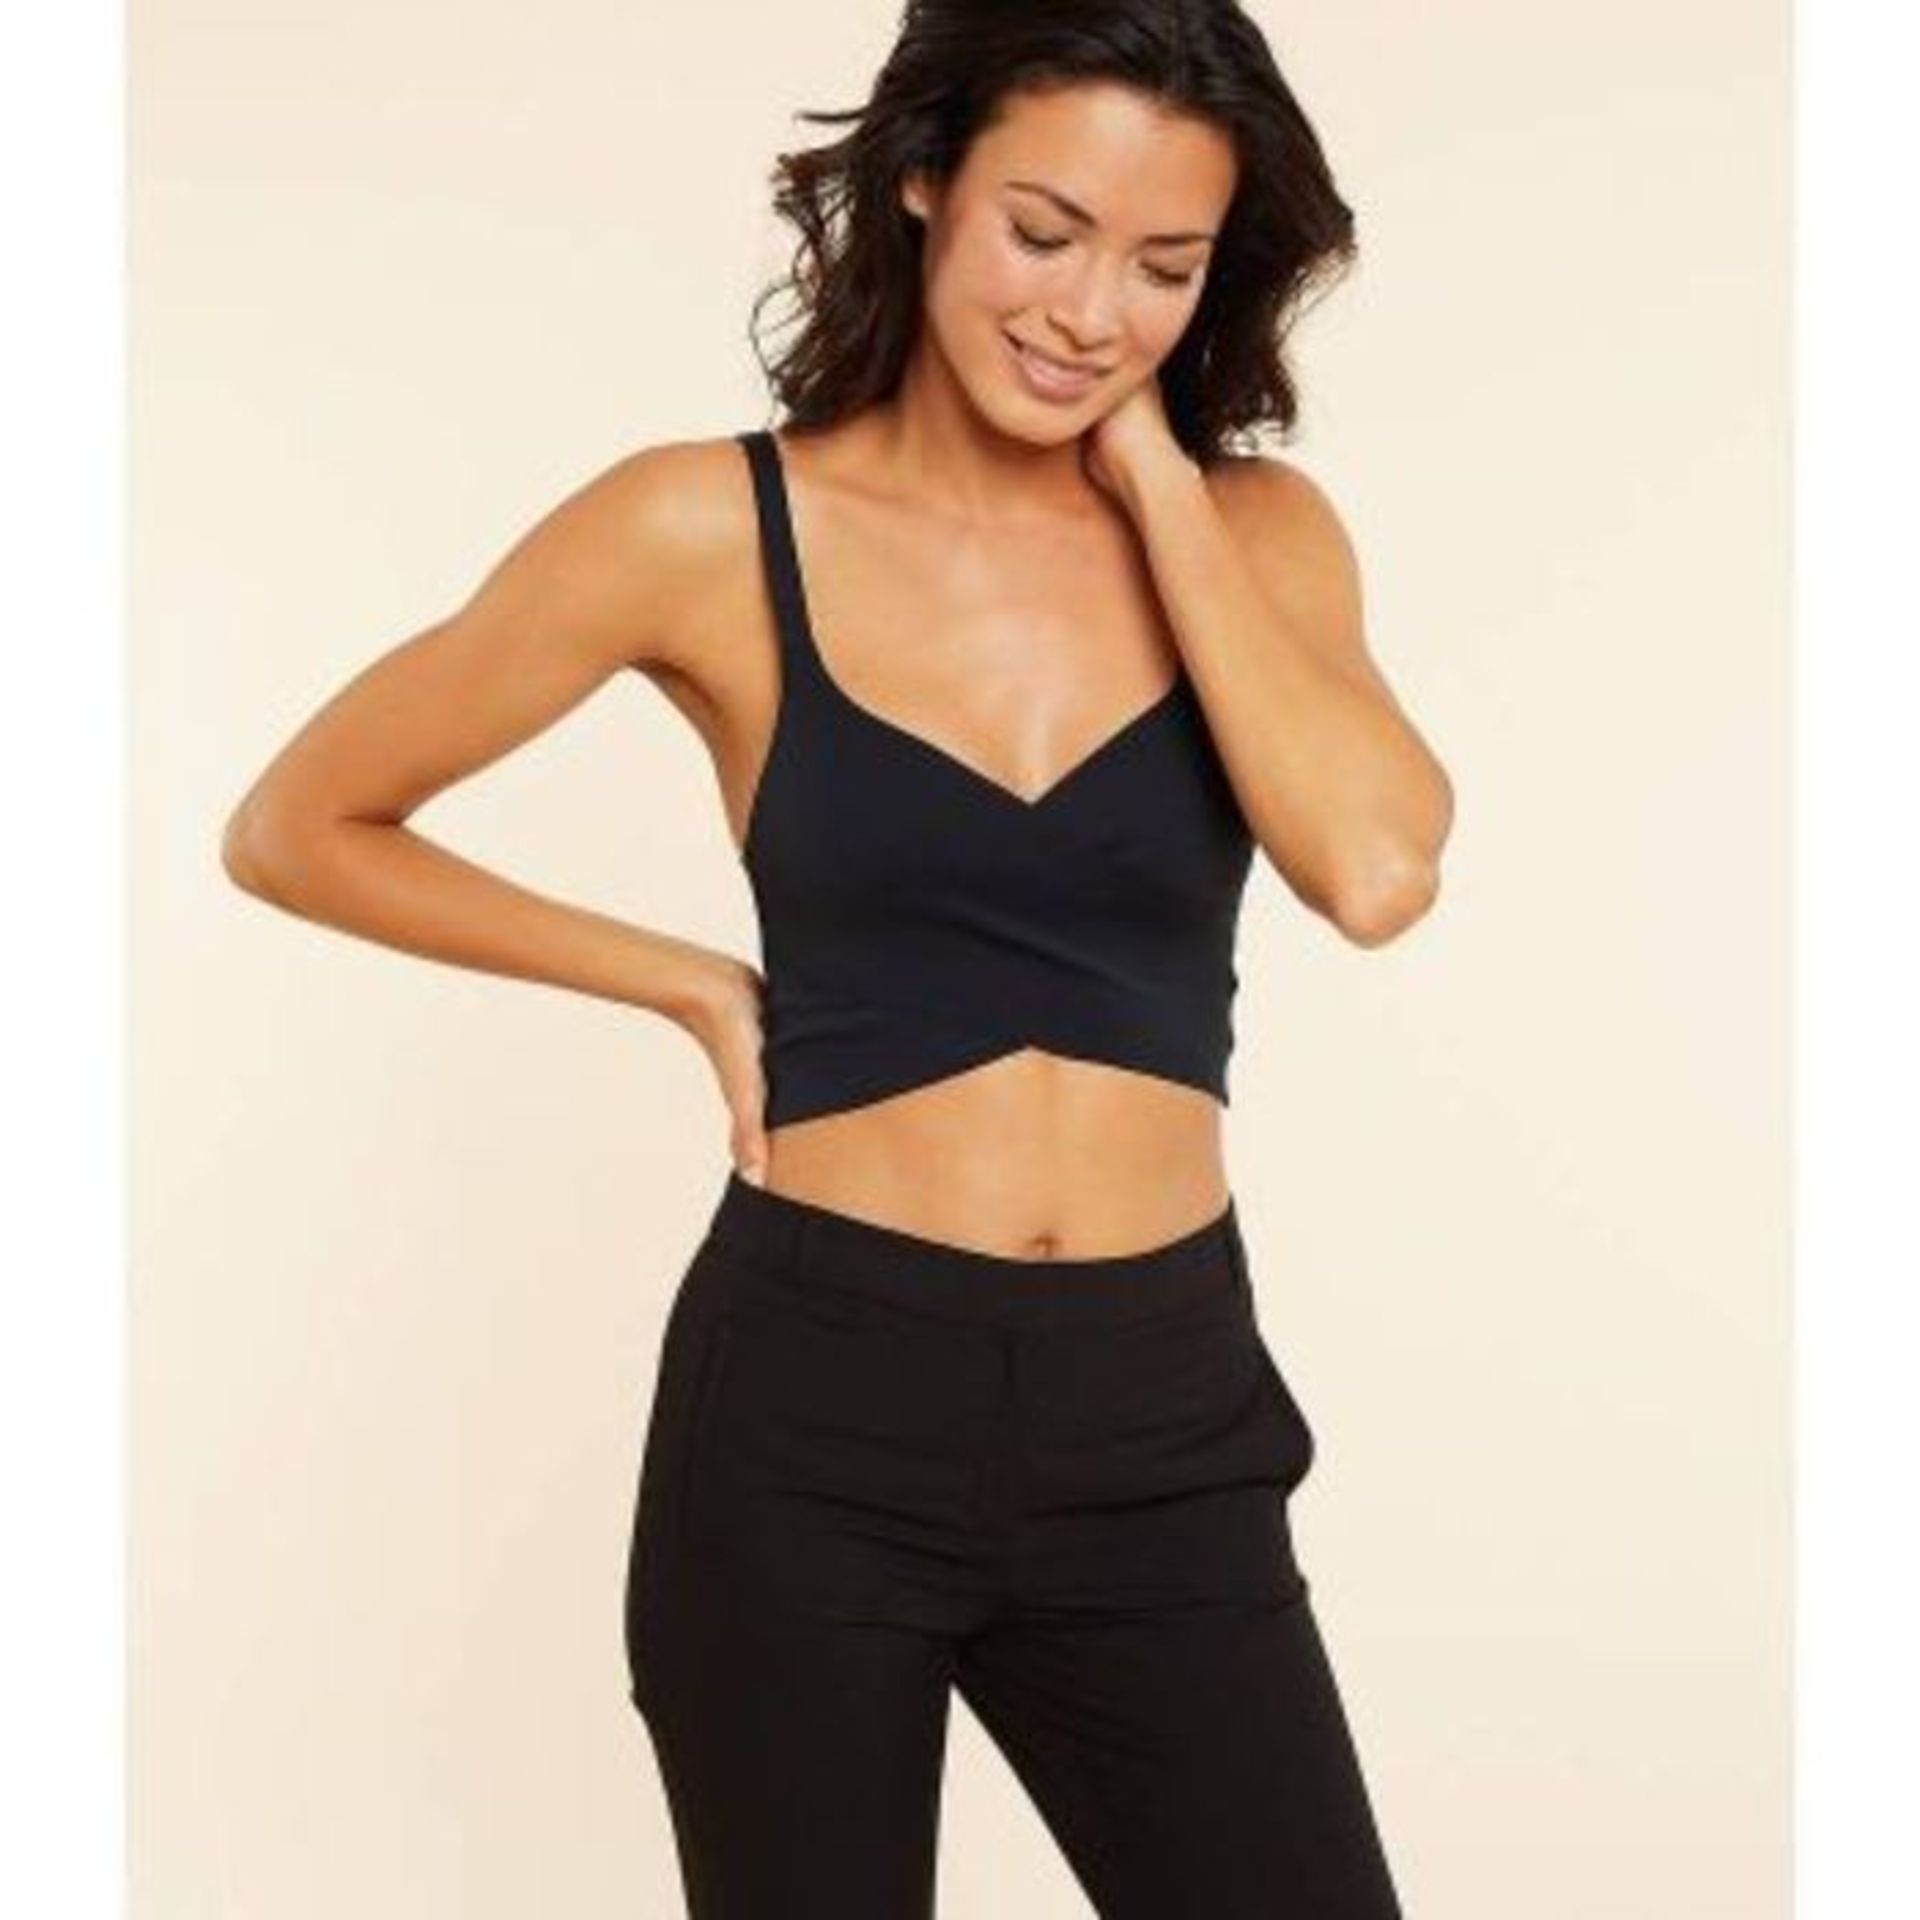 ETAM - 24 HOURS WRAPOVER BRALETTE WITHOUT UNDERWIRING - BLACK - SIZE: XS (UK 6). RRP £36.00 AS NEW - Image 3 of 3